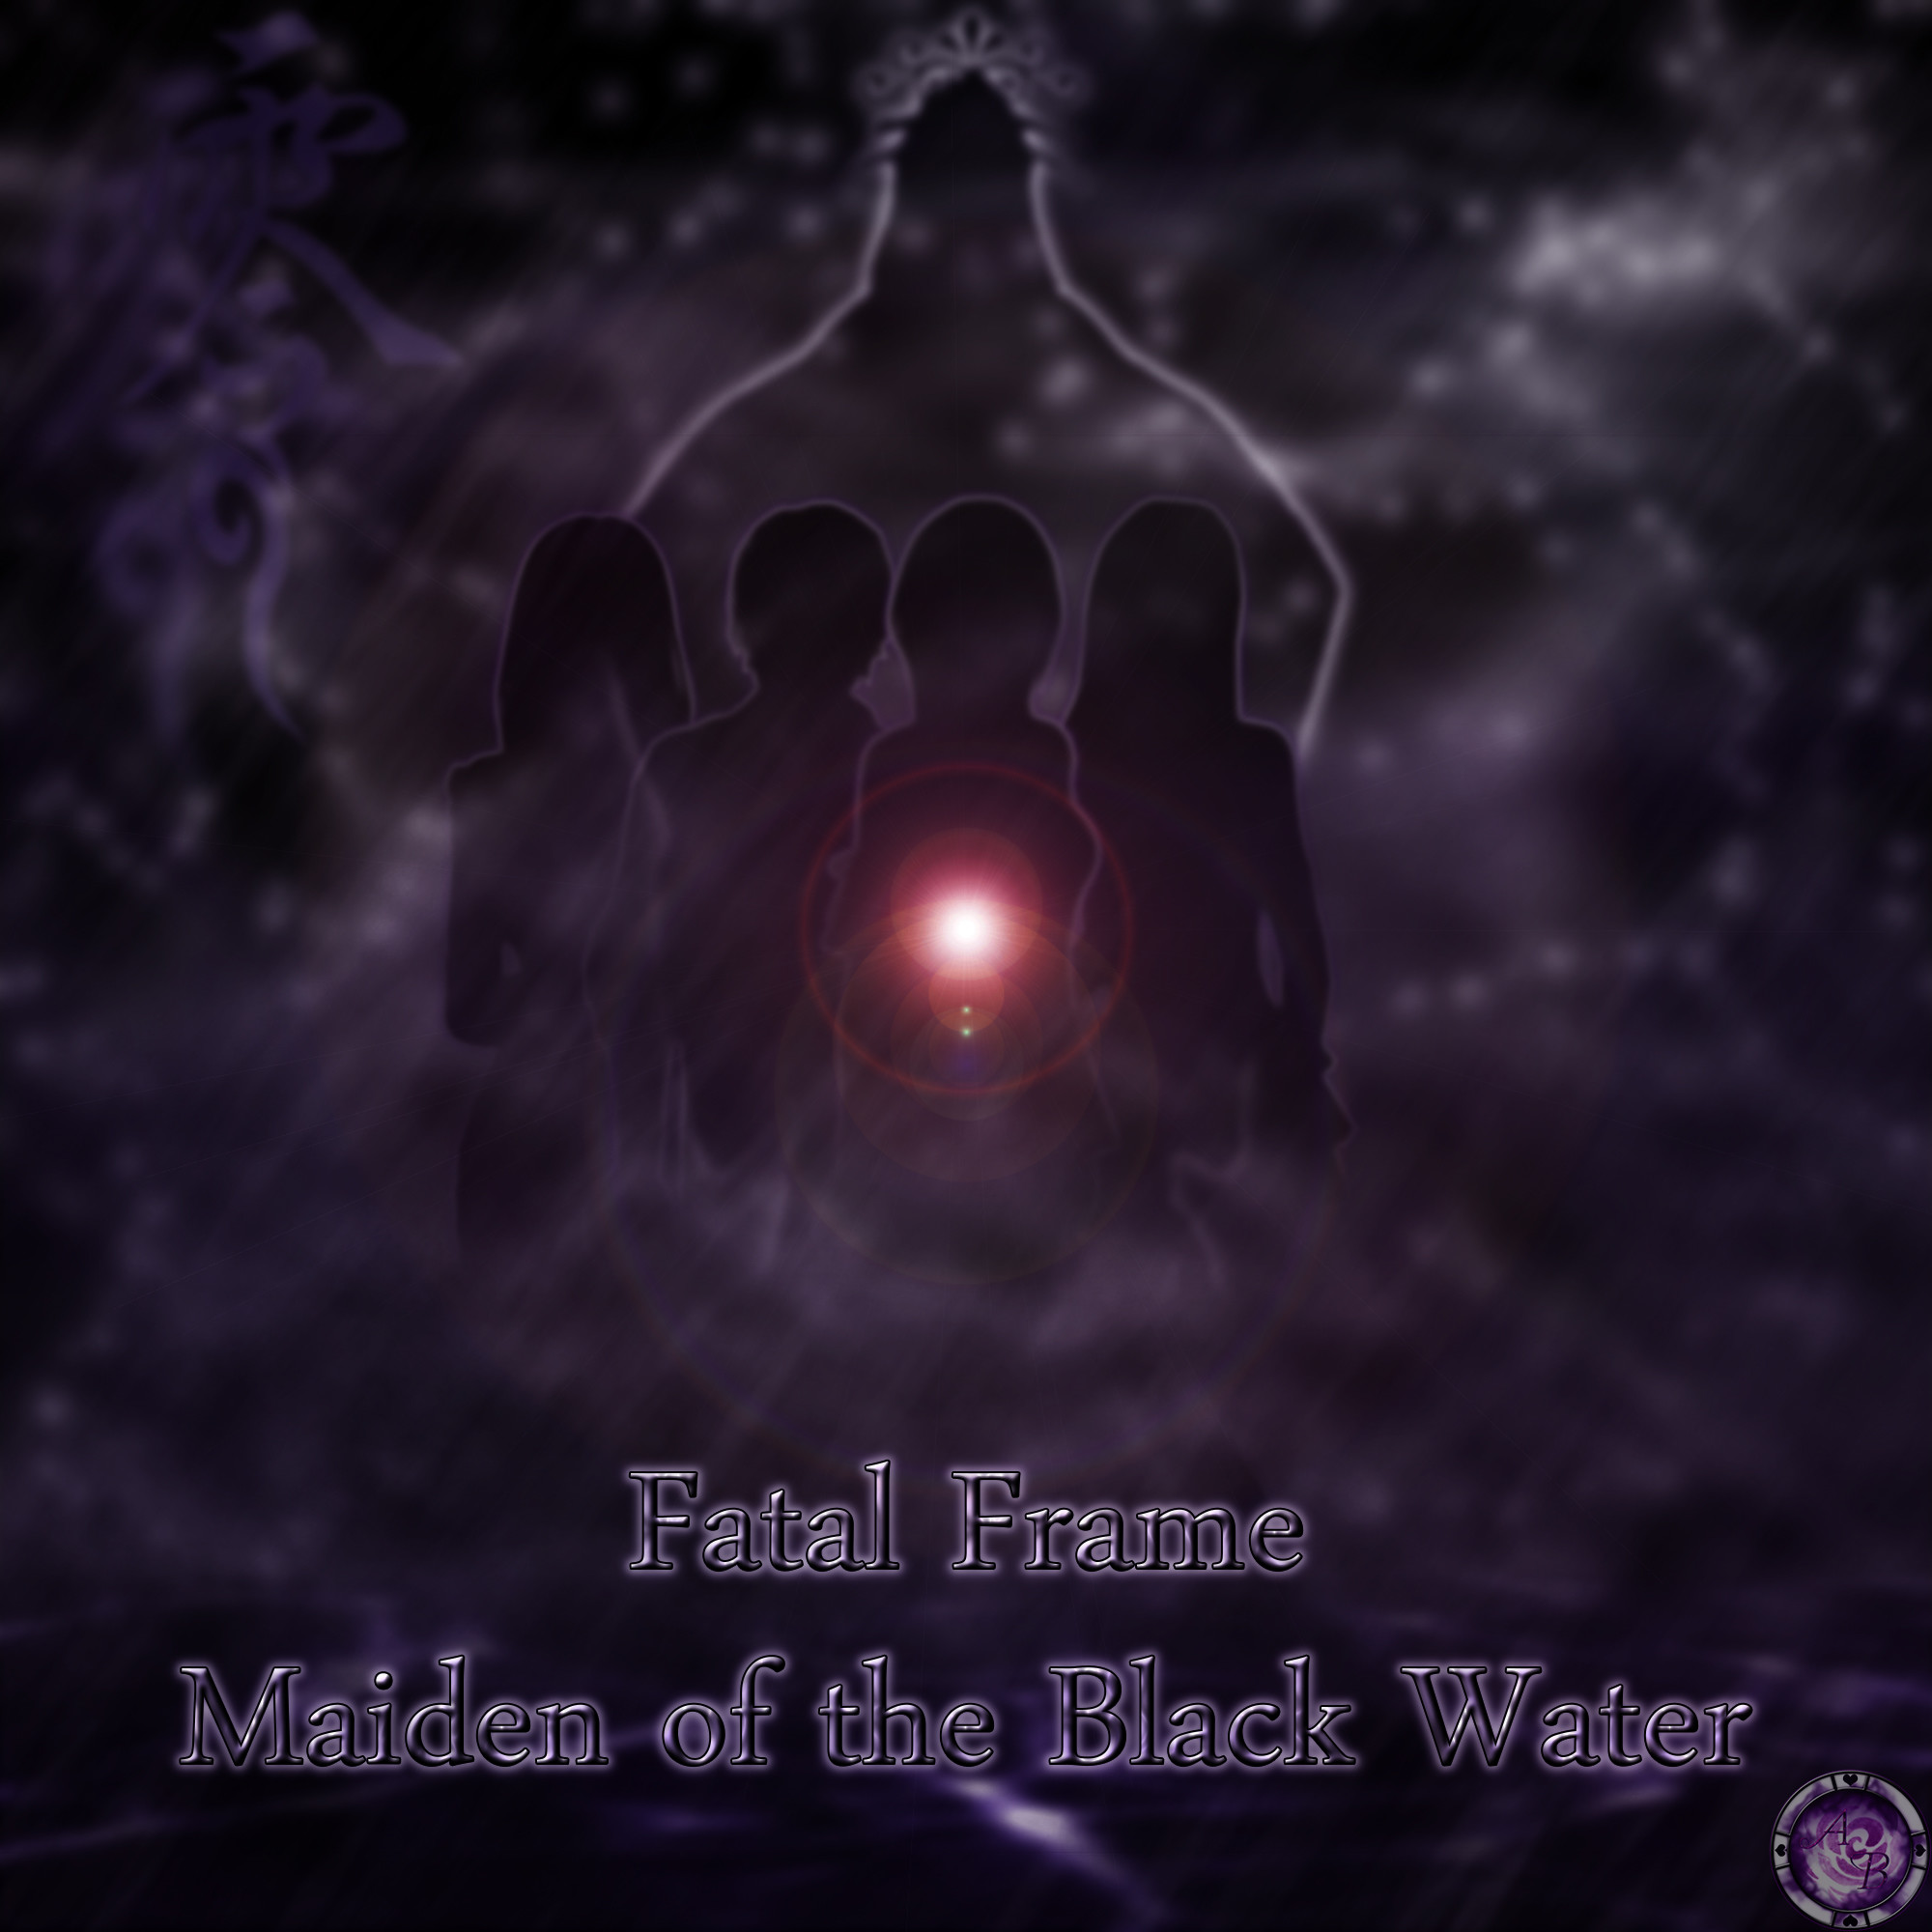 2000x2000 ... Fatal Frame 5 Maiden of the Black Water by BaroqueWorks1